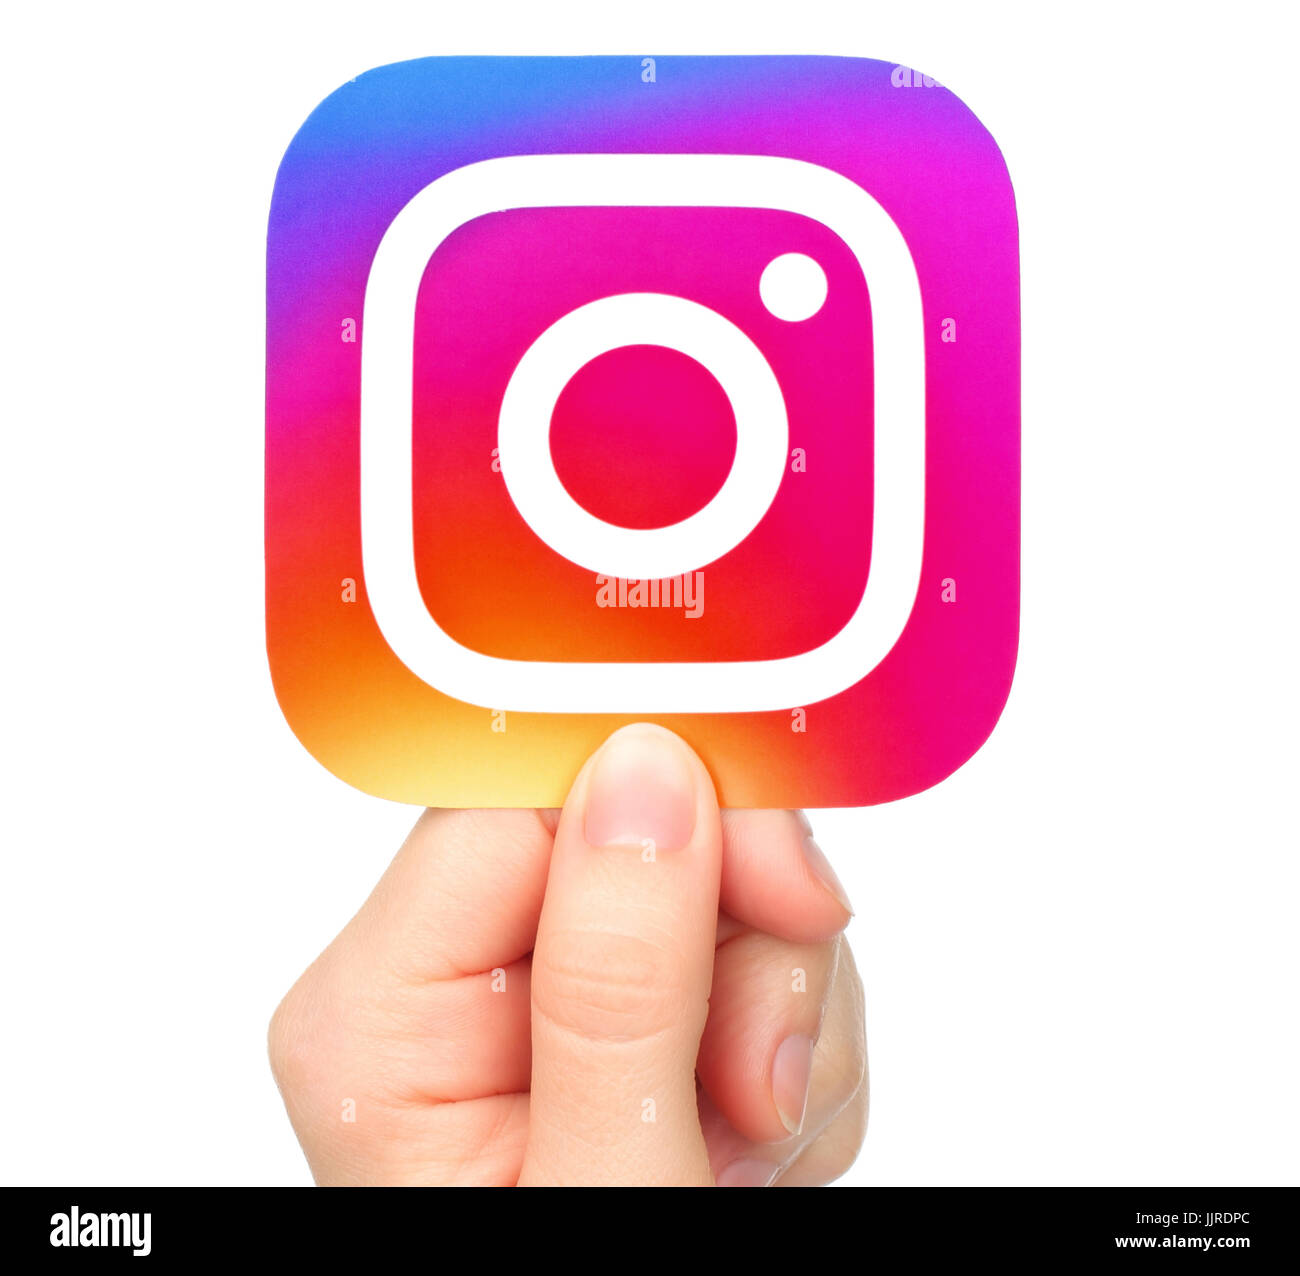 Kiev, Ukraine - January 20, 2017: Hand holds Instagram icon printed on paper. Instagram is an online mobile photo-sharing, video-sharing service Stock Photo